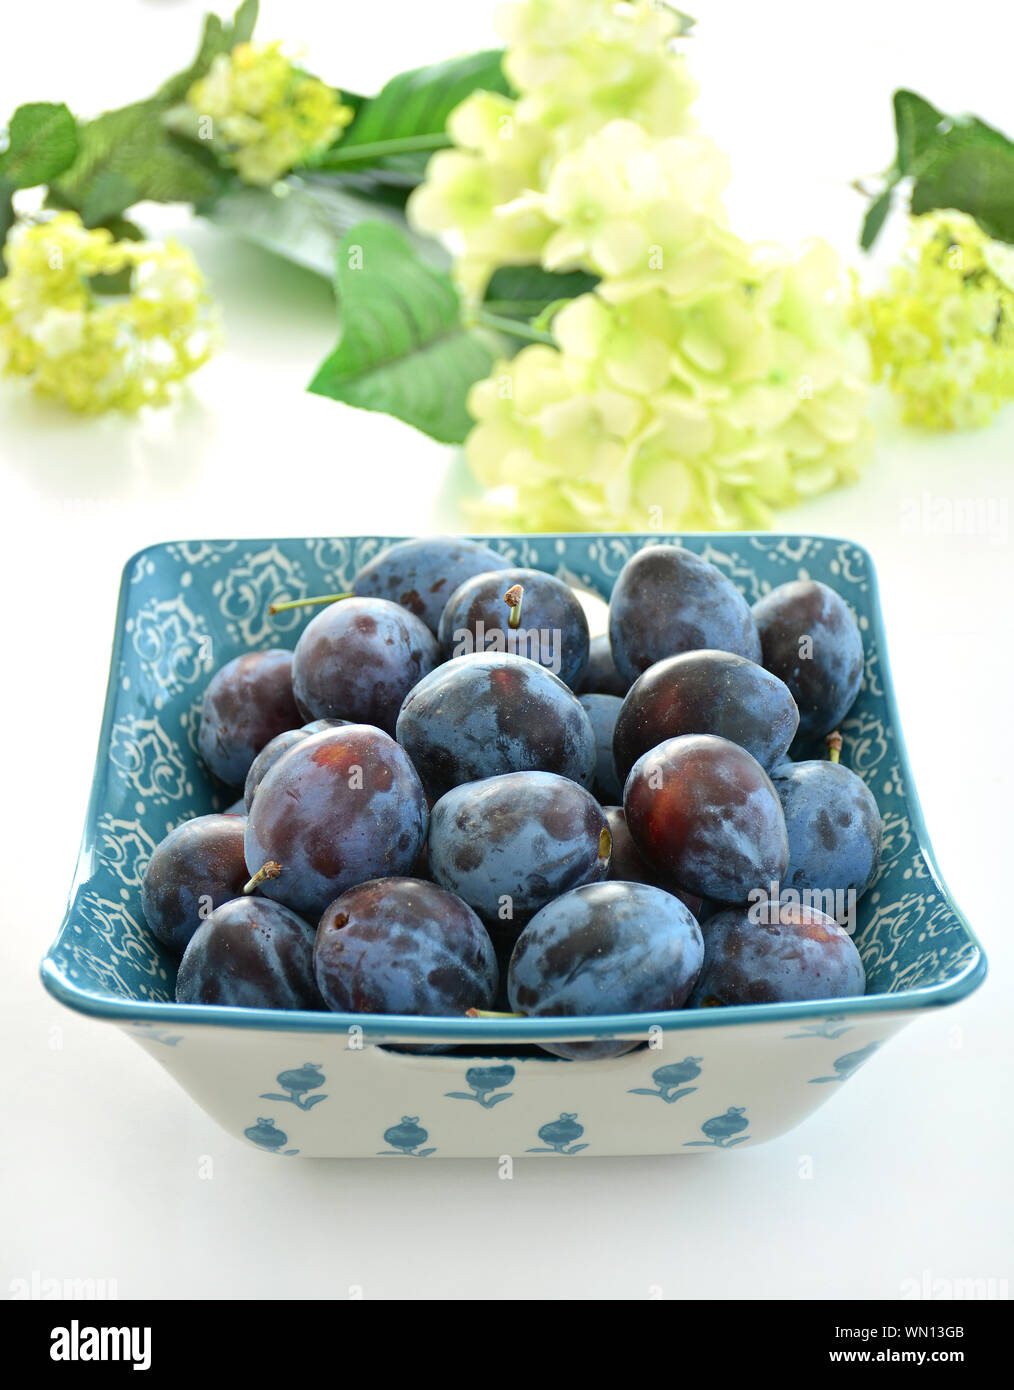 Fresh picked organic prune plums in decorative bowl on white background in vertical format.  Selective focus. Healthy food concept. Stock Photo